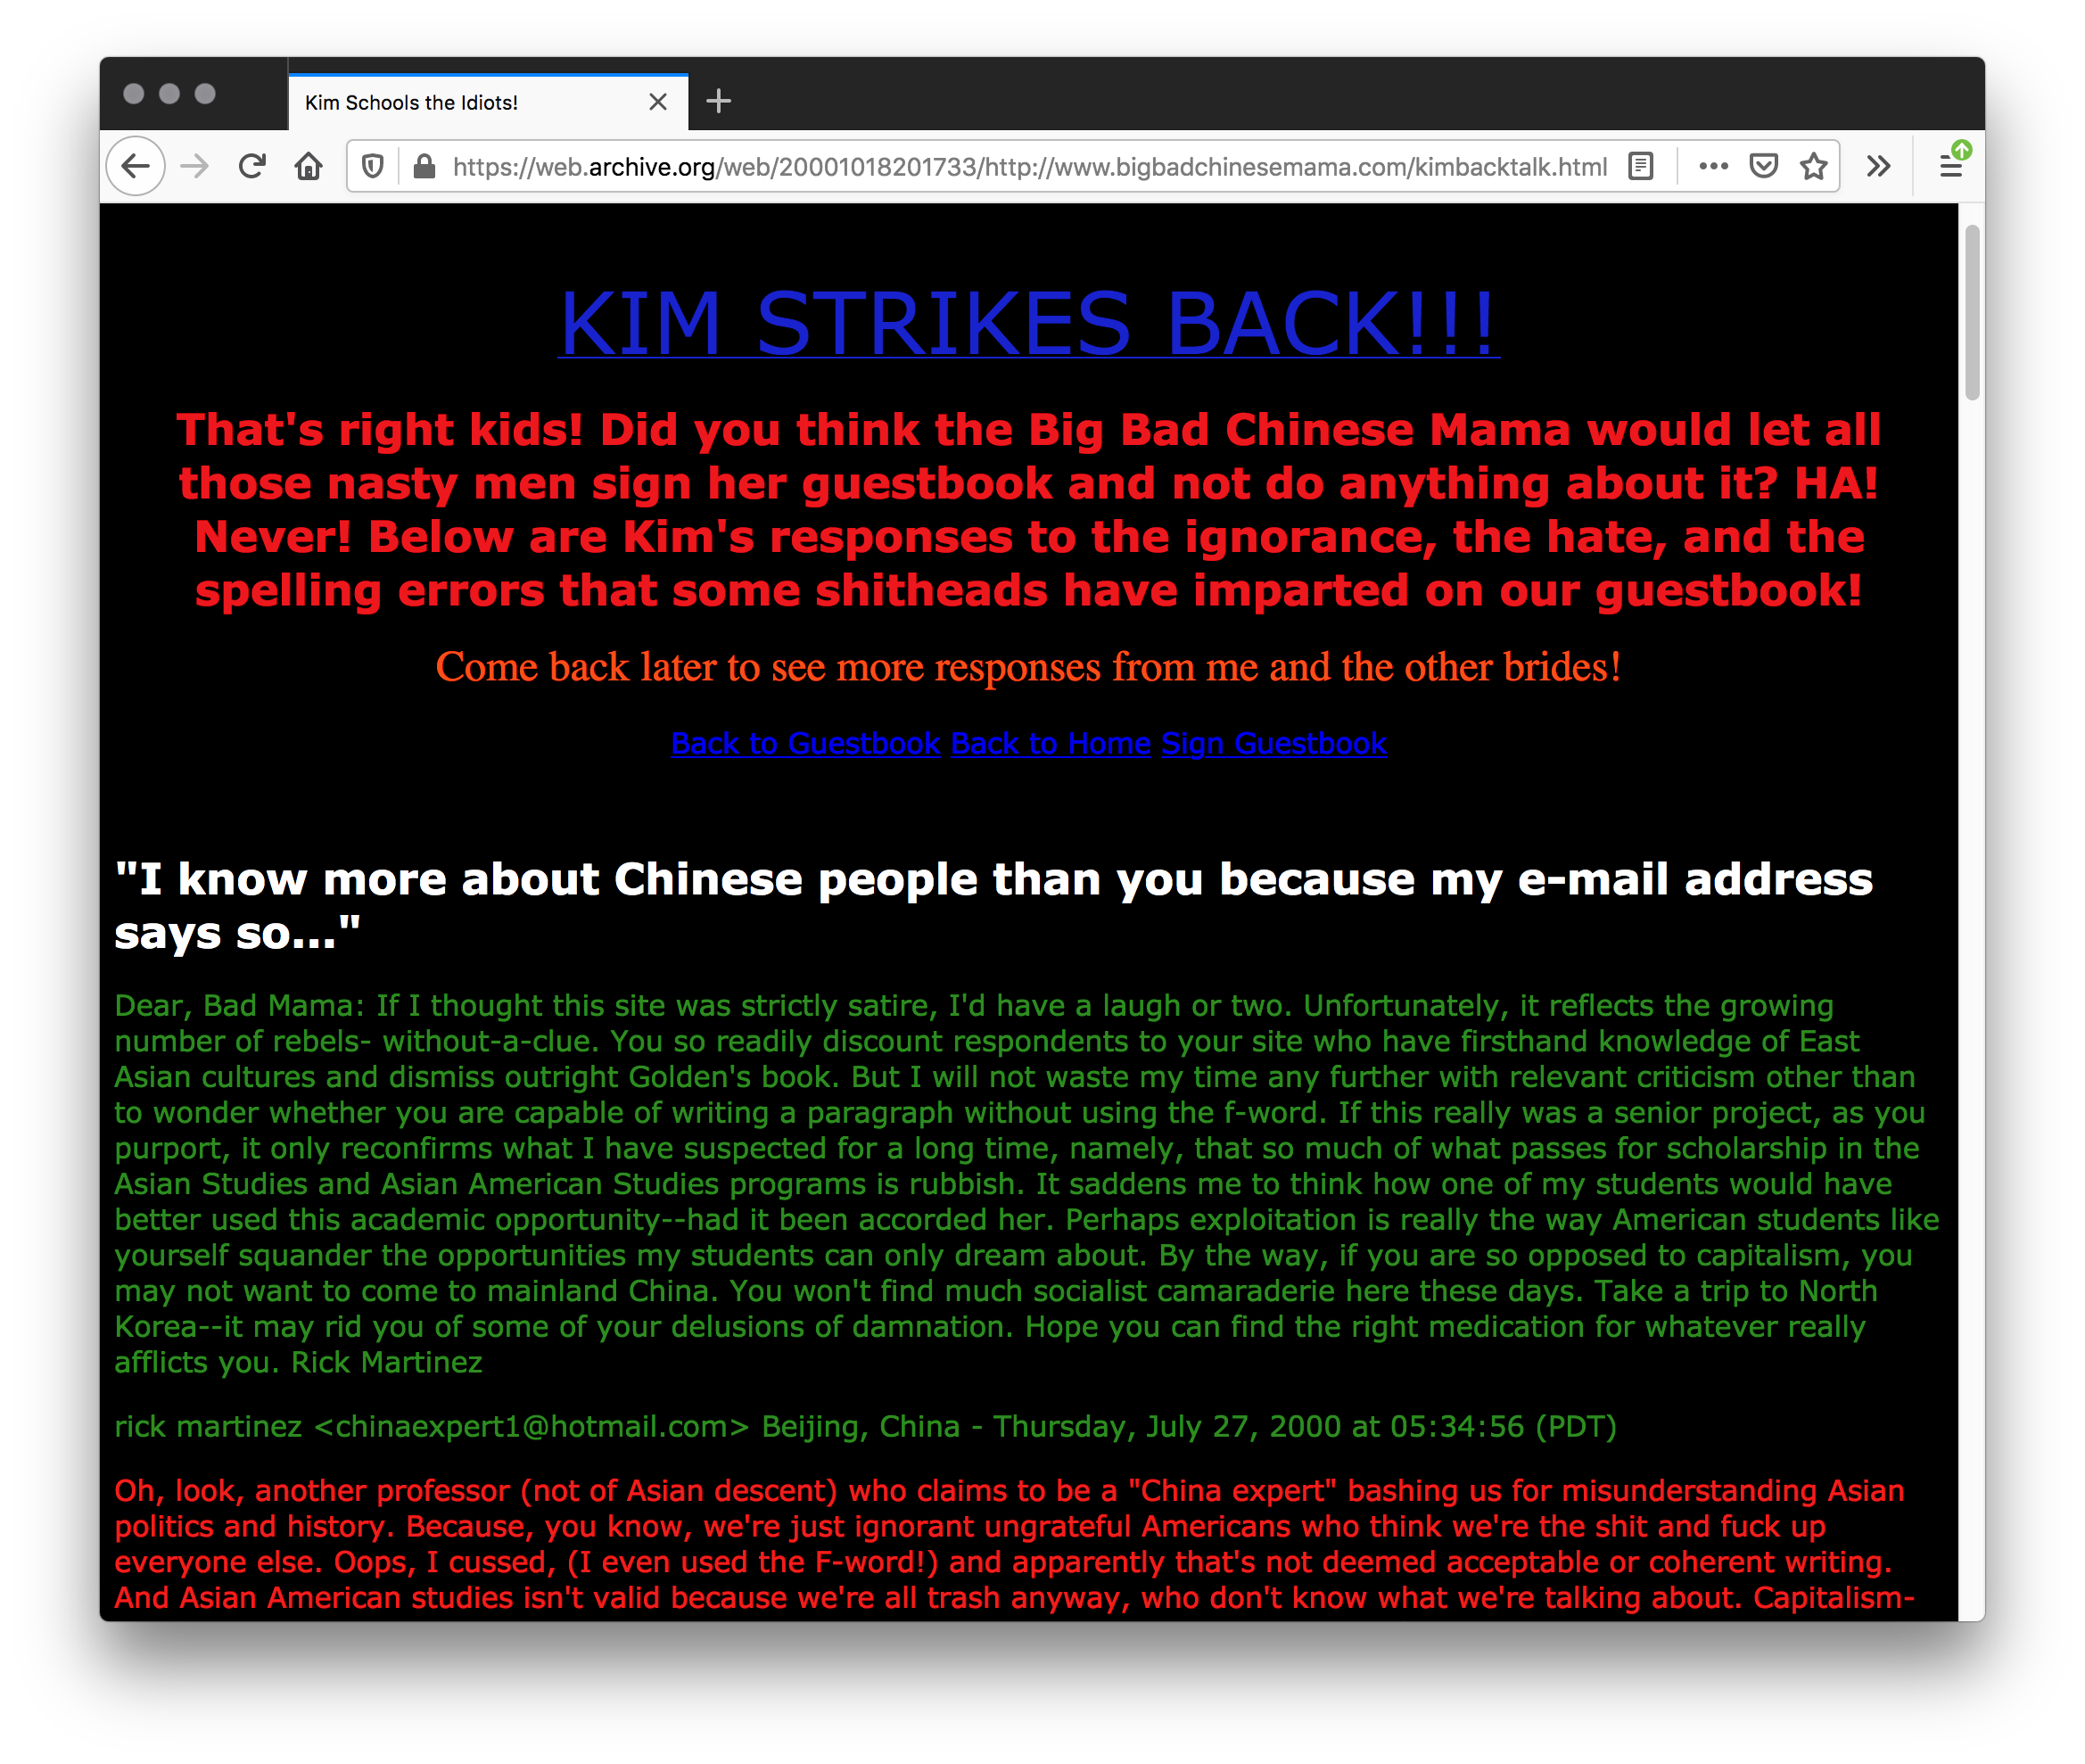 A black webpage overwhelming filled with pagraphs or lines of blue, red, white, and green text.